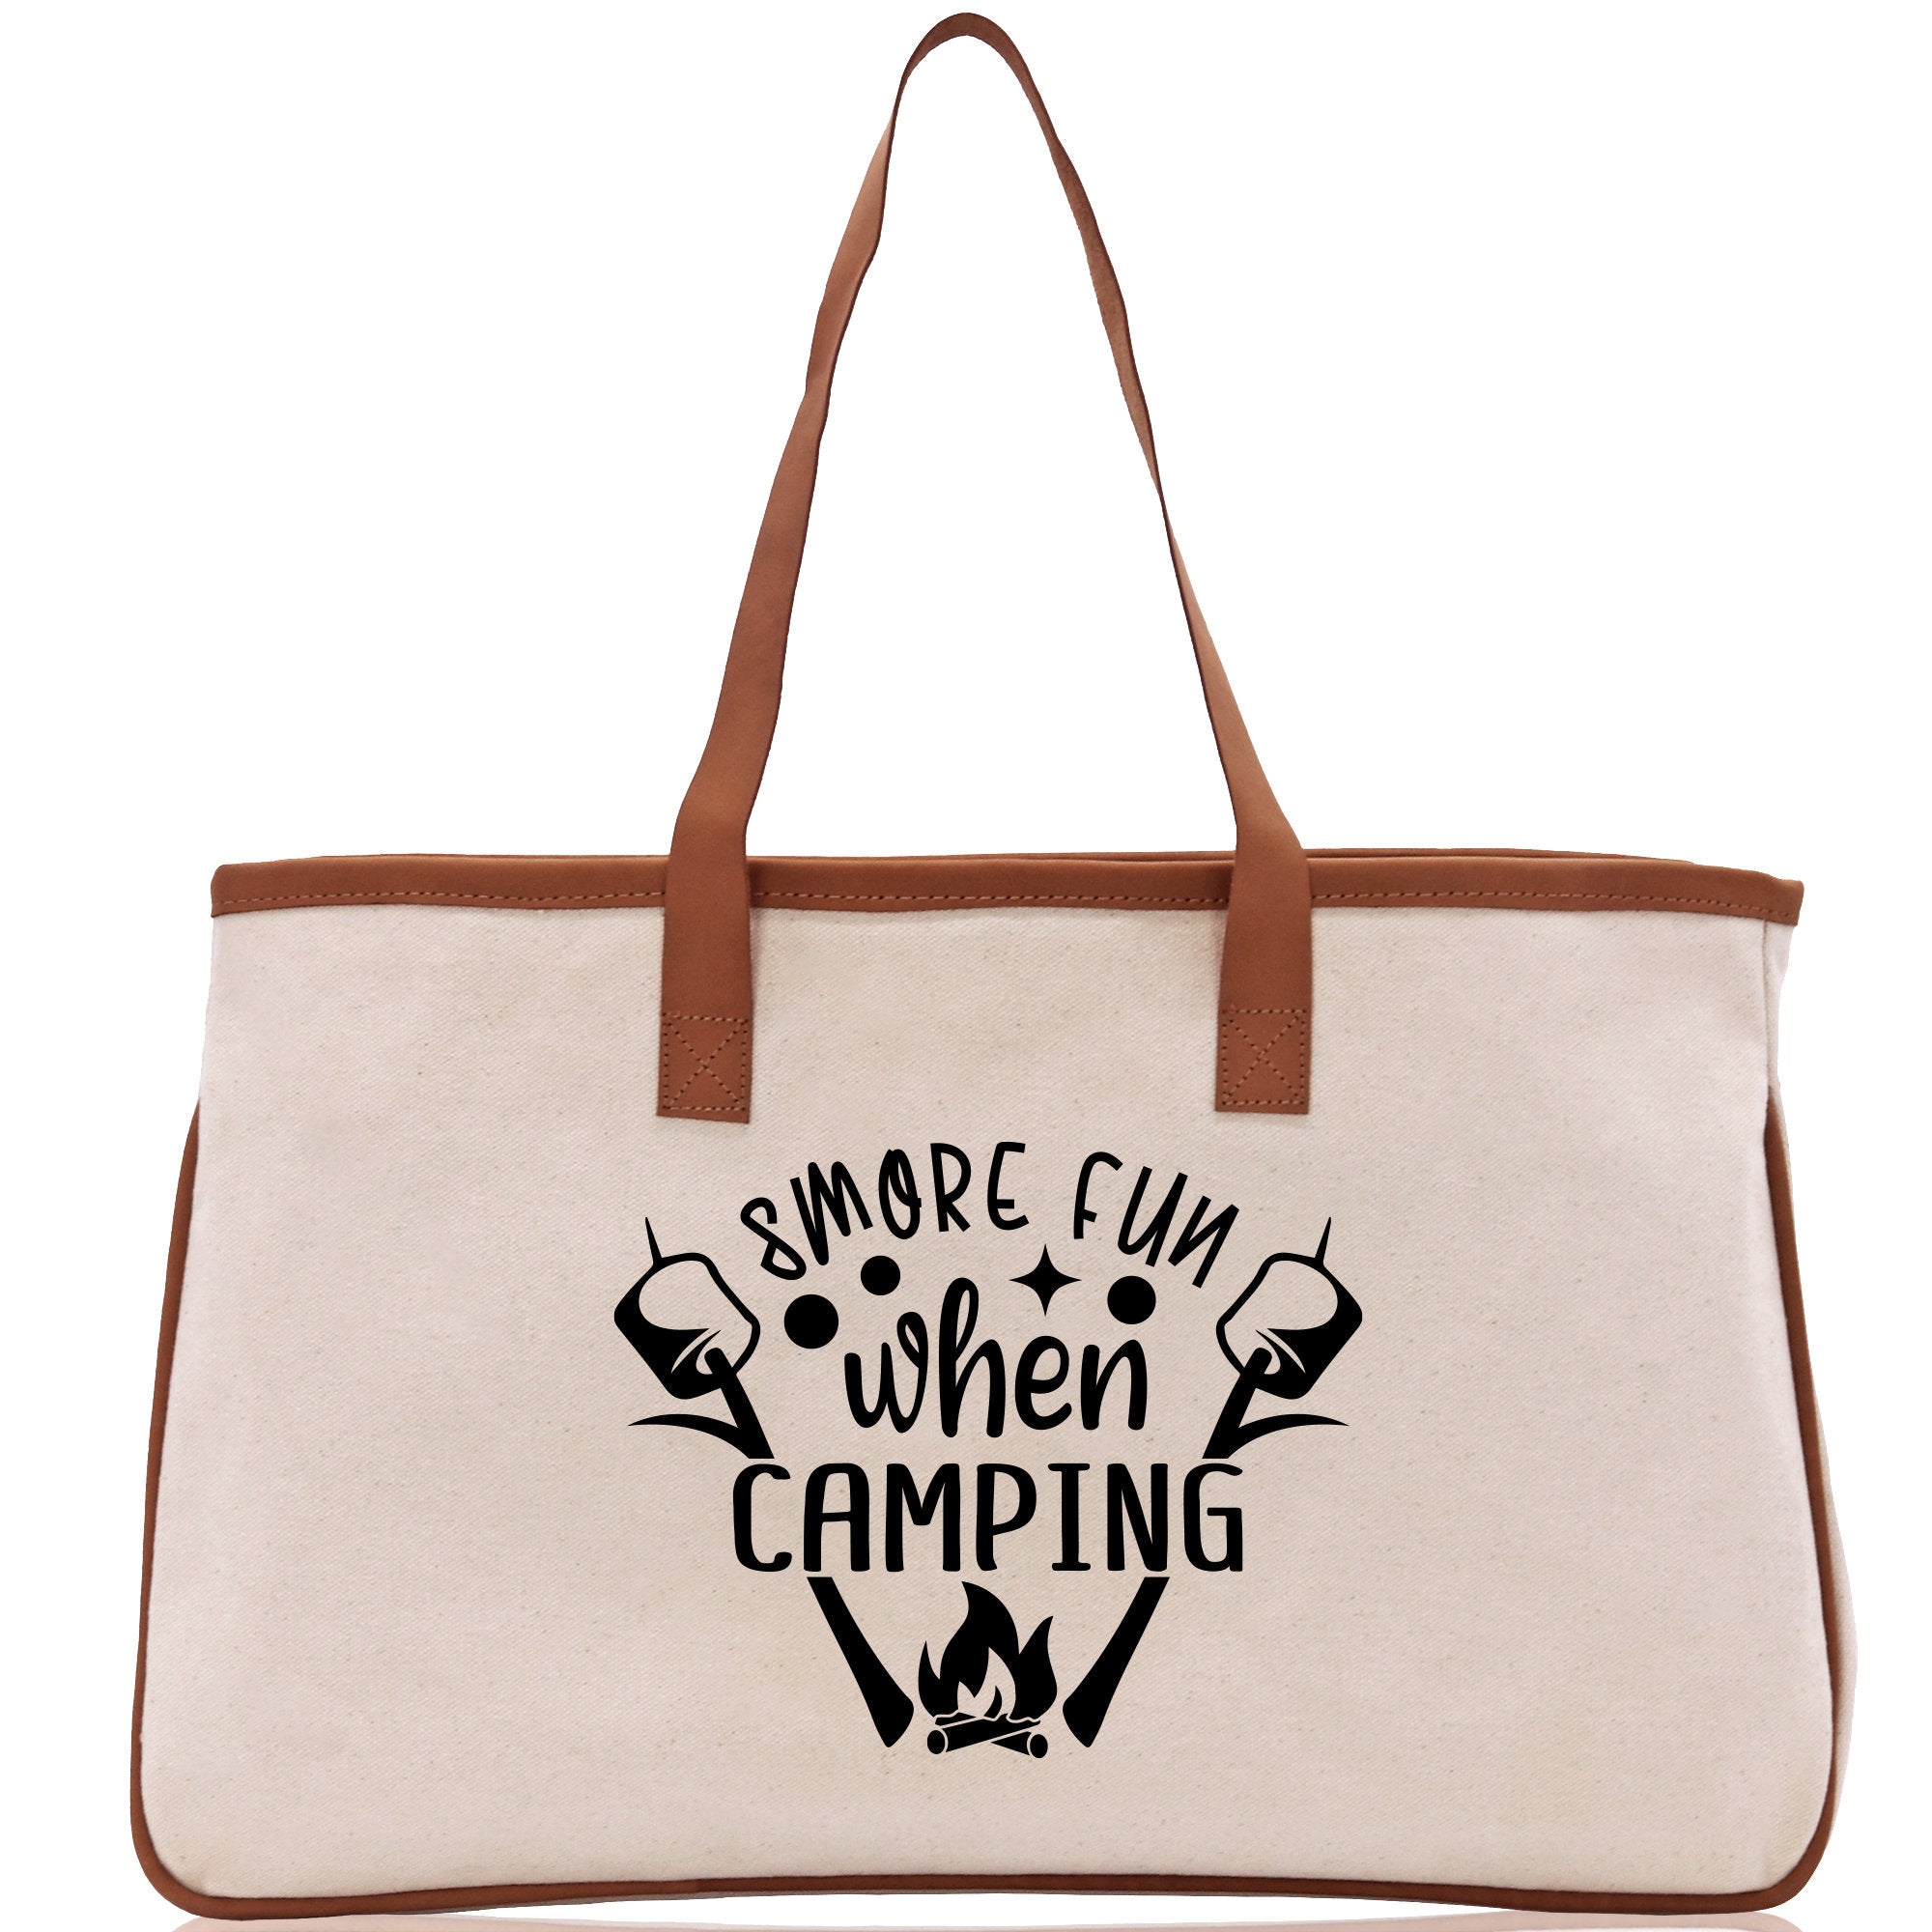 Smore Fun When Camping Cotton Canvas Chic Tote Bag Camping Tote Camping Lover Gift Tote Bag Outdoor Tote Weekender Tote Camper Tote